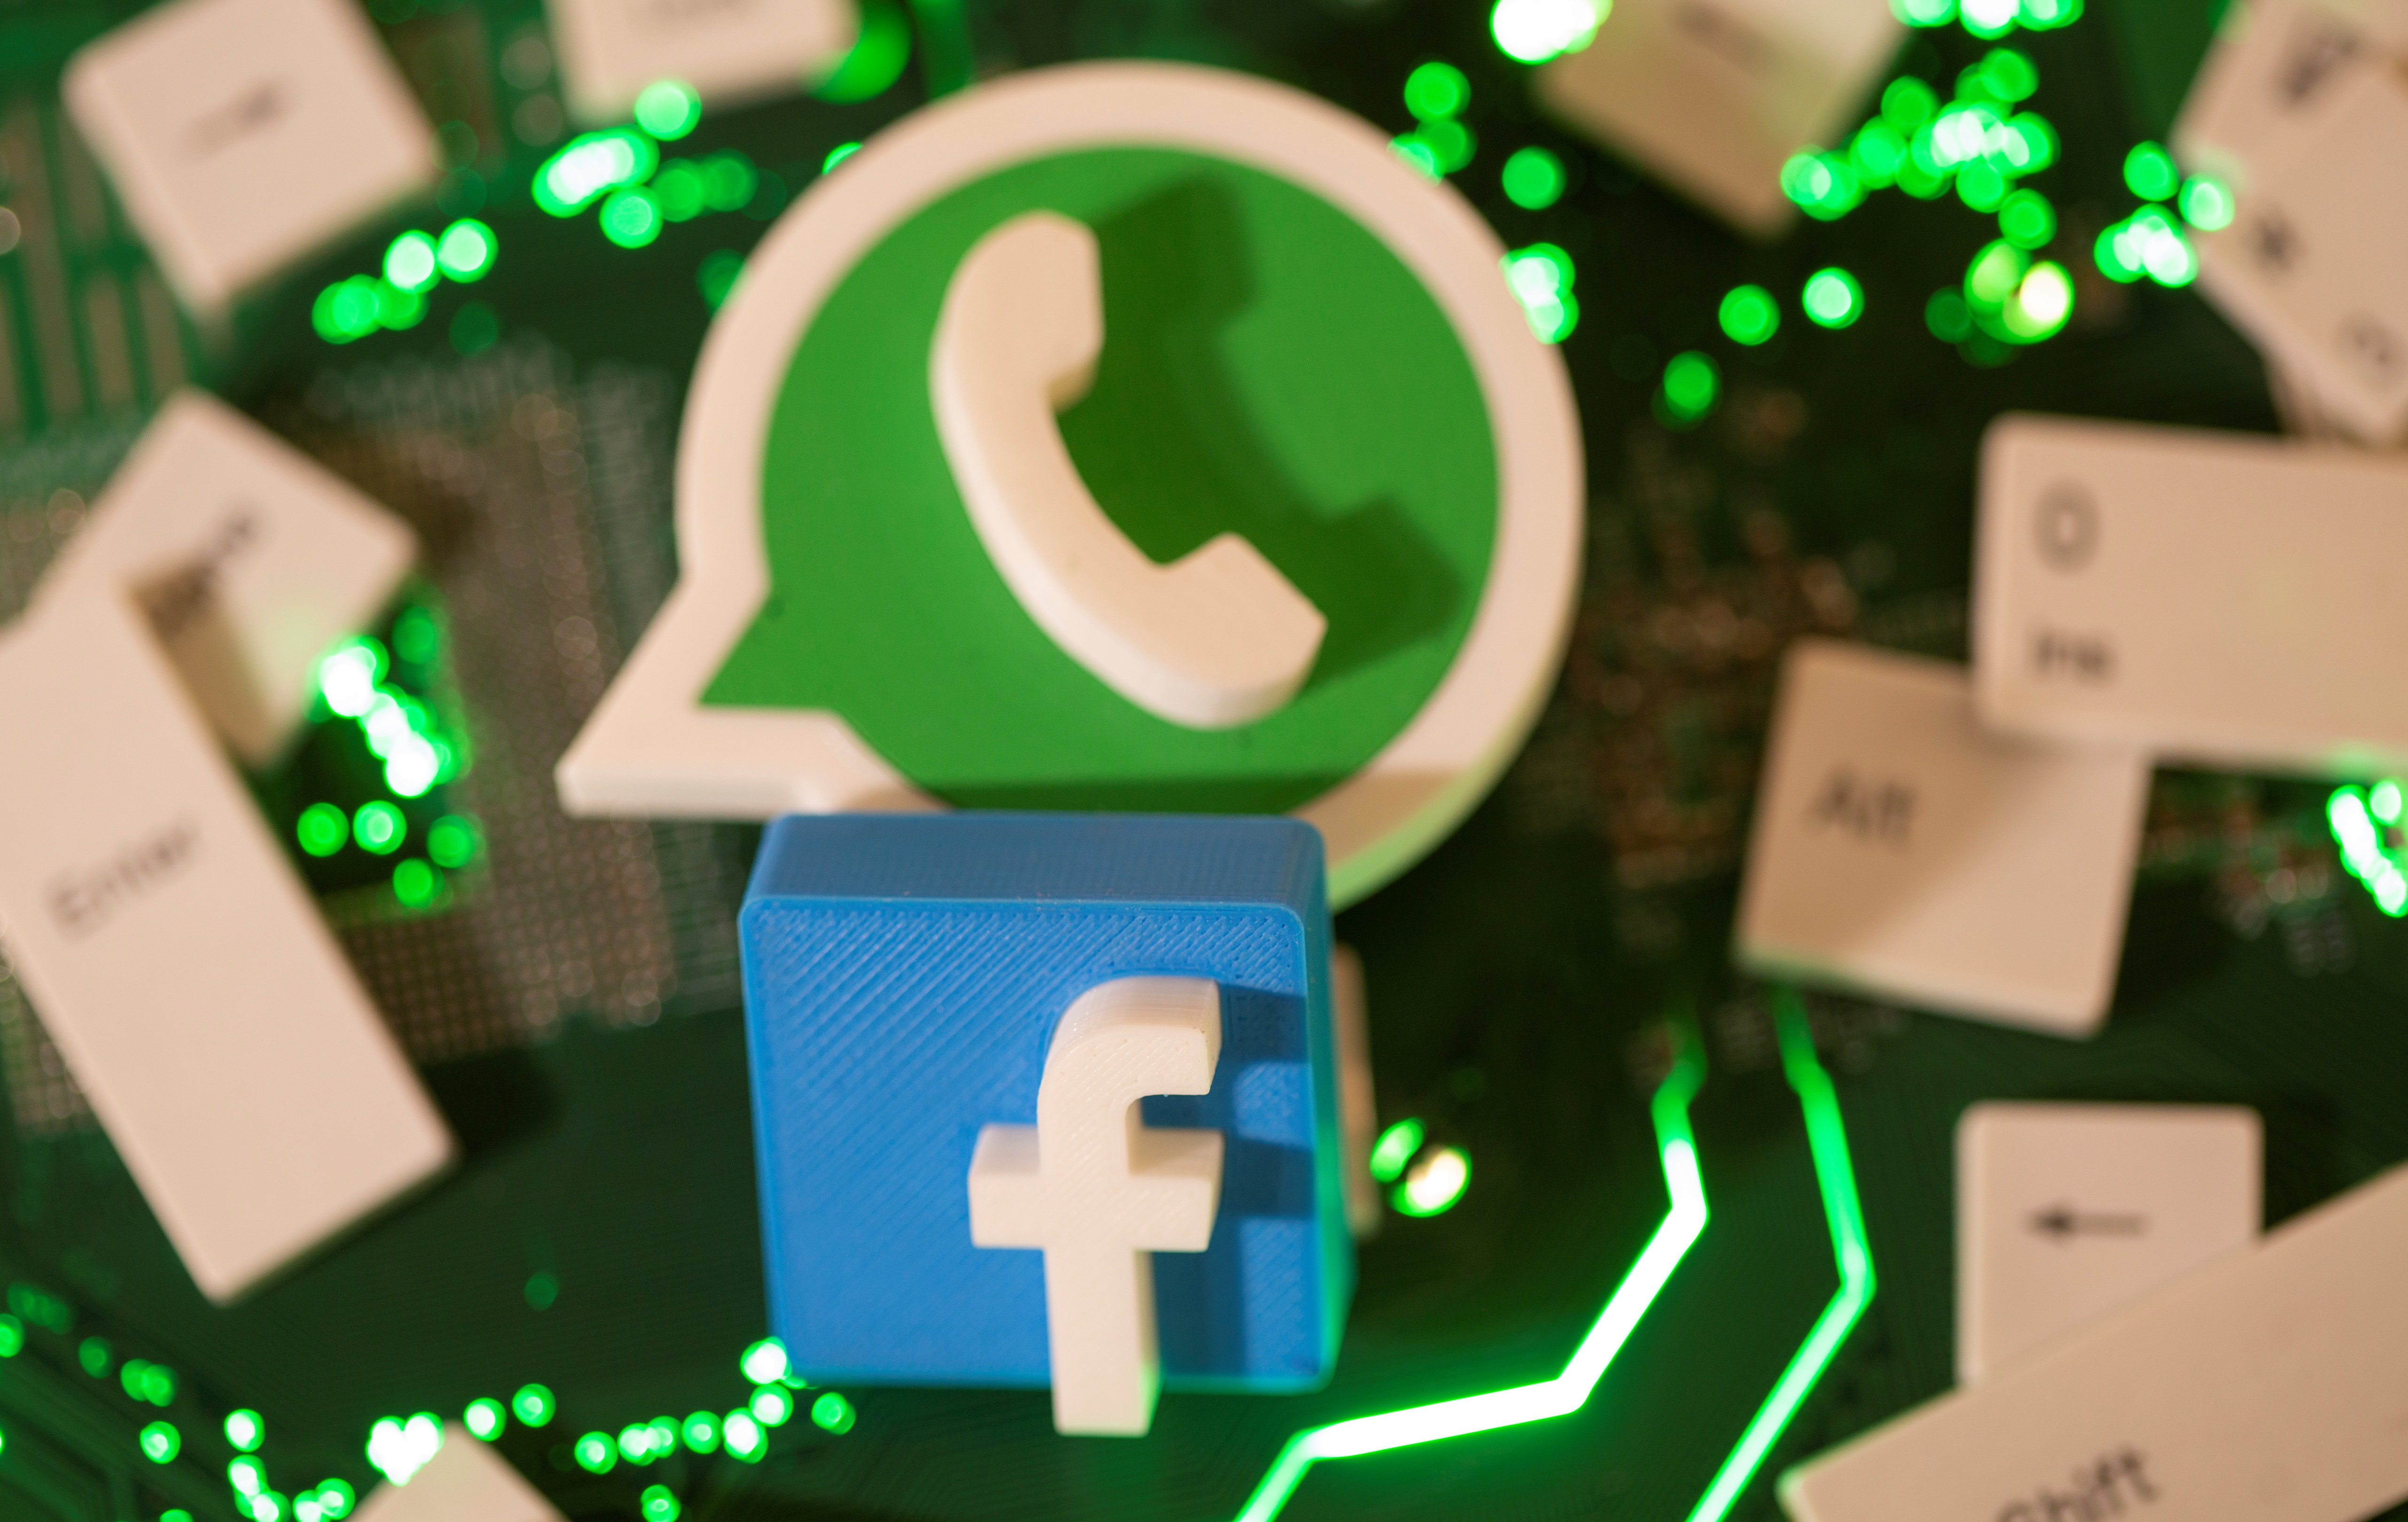 3D printed Facebook and WhatsApp logos and keyboard buttons are placed on a computer motherboard in this illustration taken January 21, 2021. REUTERS/Dado Ruvic/File Photo